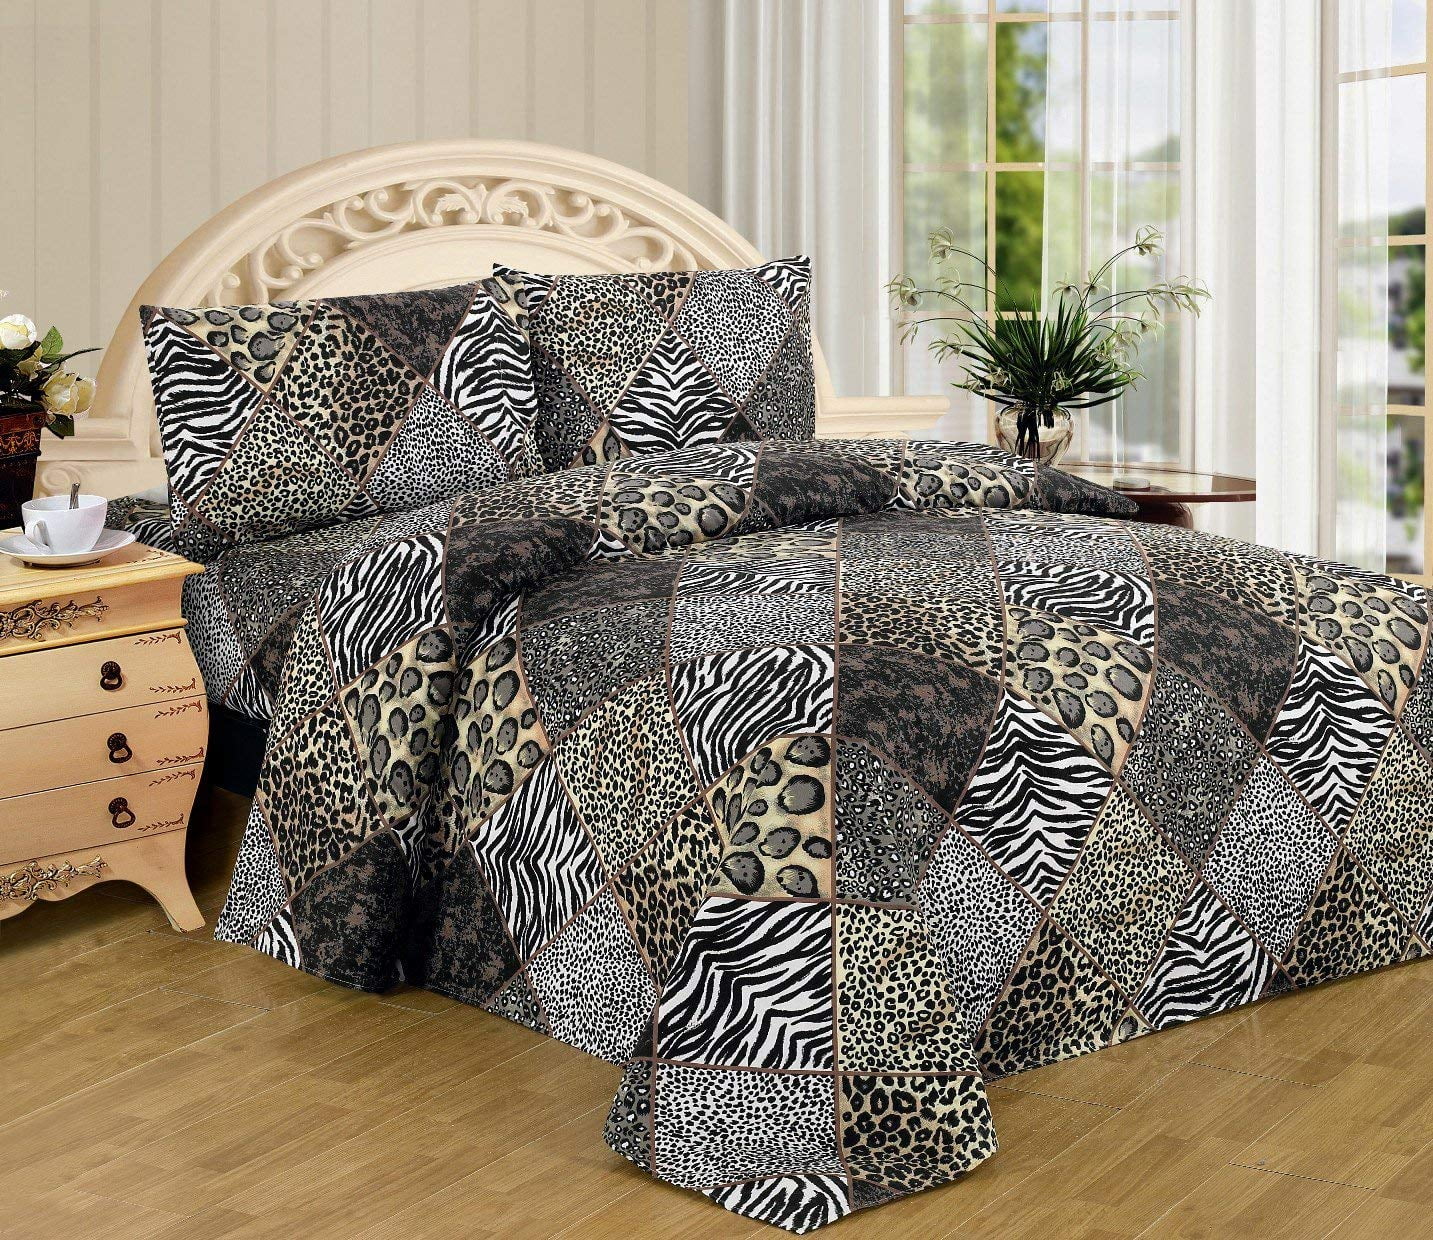 NEW TAN ZEBRA PRINT MICRO FLEECE SHEET SET FULL FITTED 2 CASES TAUPE FLAT 